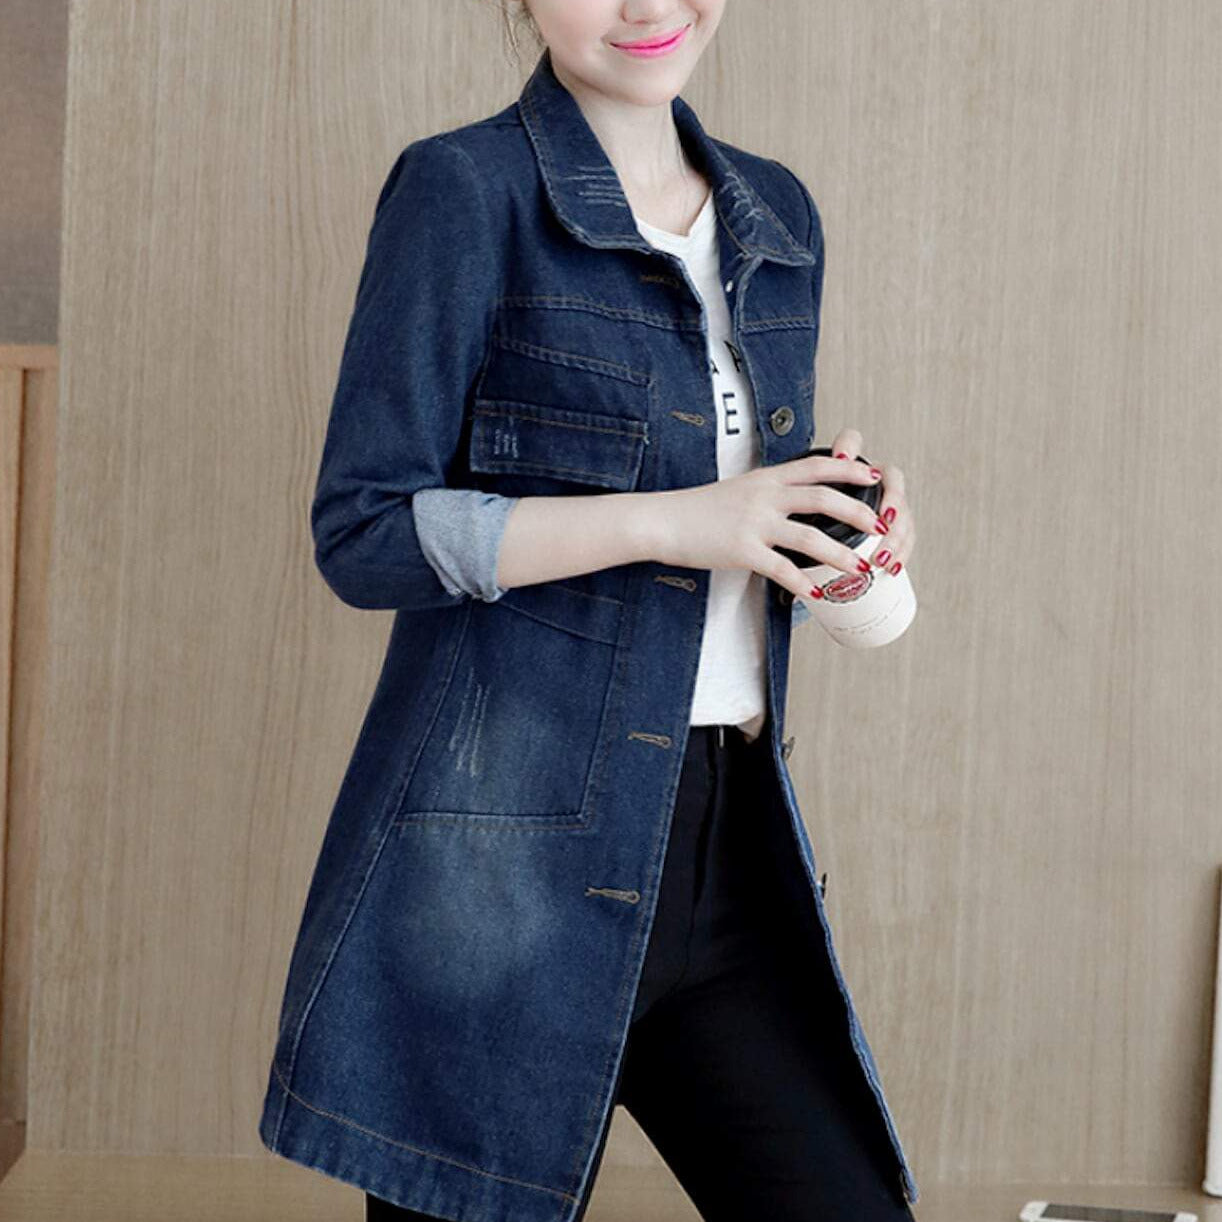 Lady Distressed Hole Over Knee Long Denim Jean Jacket Slim Fit Trench Coat  Tops | eBay